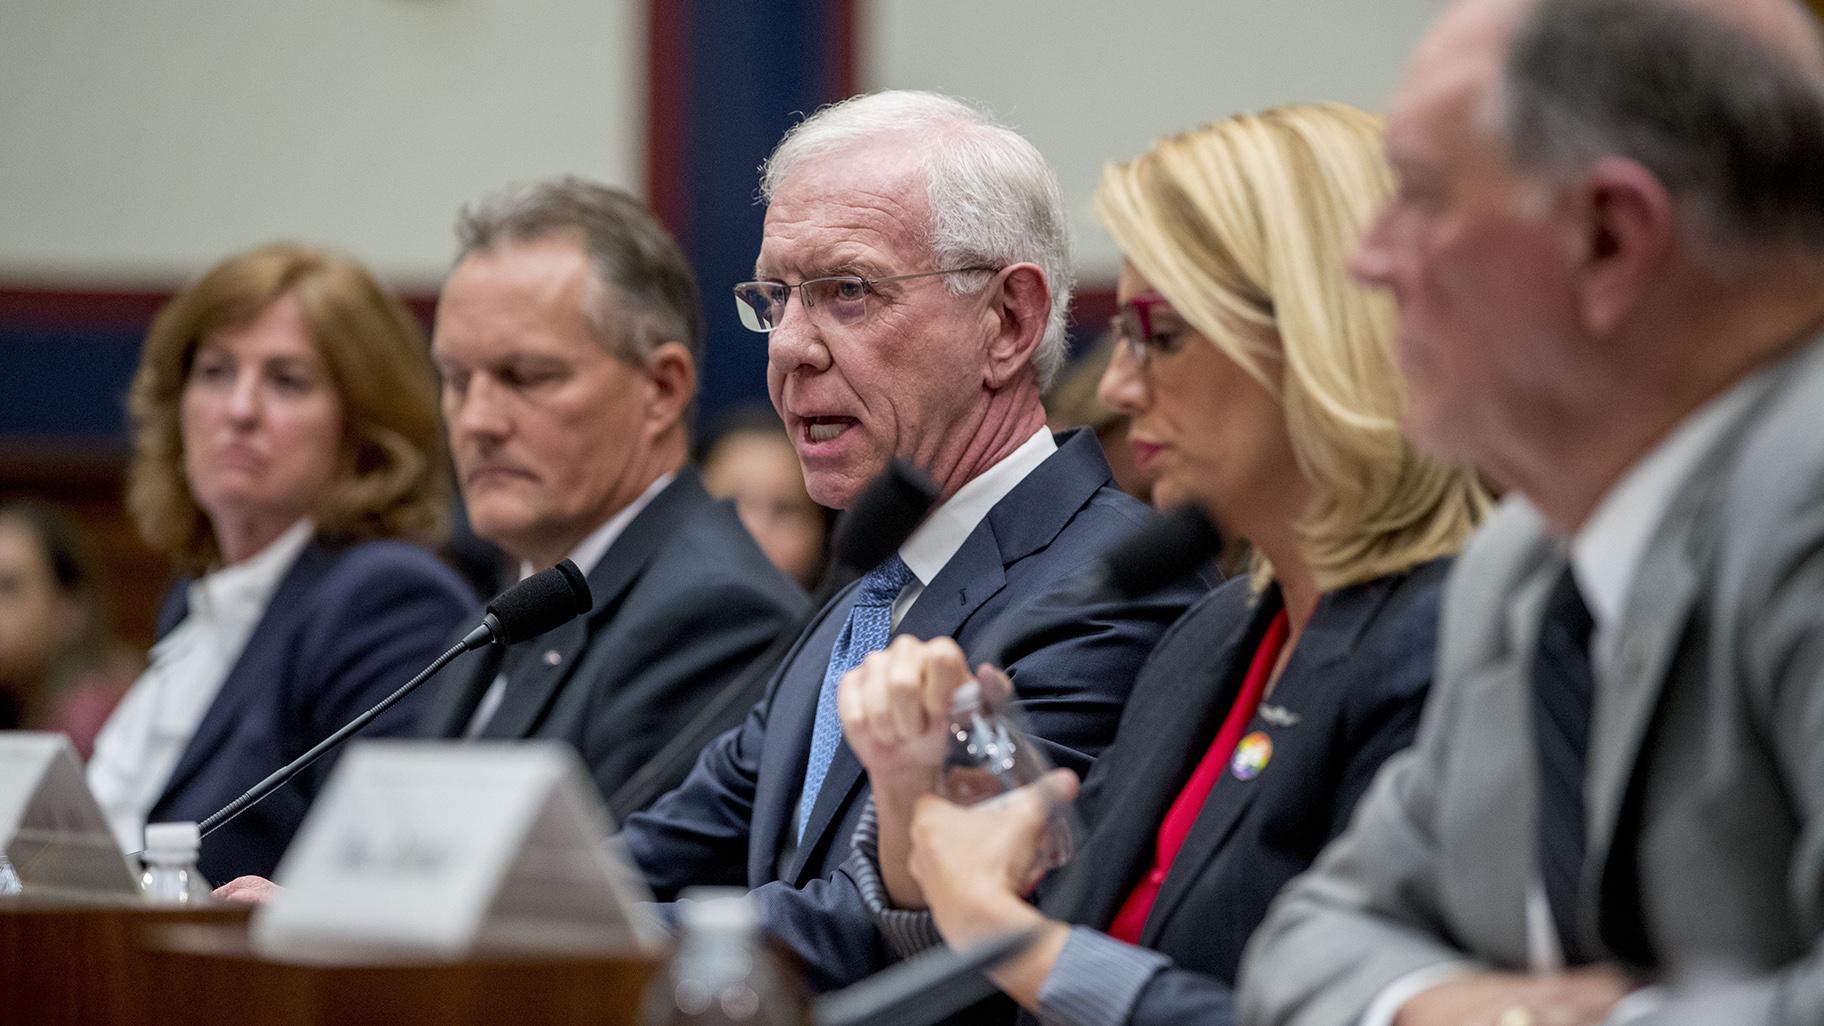 Captain Chesley “Sully” Sullenberger, accompanied by, from left, Sharon Pinkerton with Airlines for America, Captain Dan Carey with the Allied Pilots Association, Sara Nelson with the Association of Flight Attendants-CWA, and former Federal Aviation Administration Administrator Randy Babbitt, speaks during a House Committee on Transportation and Infrastructure hearing on the status of the Boeing 737 MAX on Capitol Hill in Washington, Wednesday, June 19, 2019. (AP Photo / Andrew Harnik)